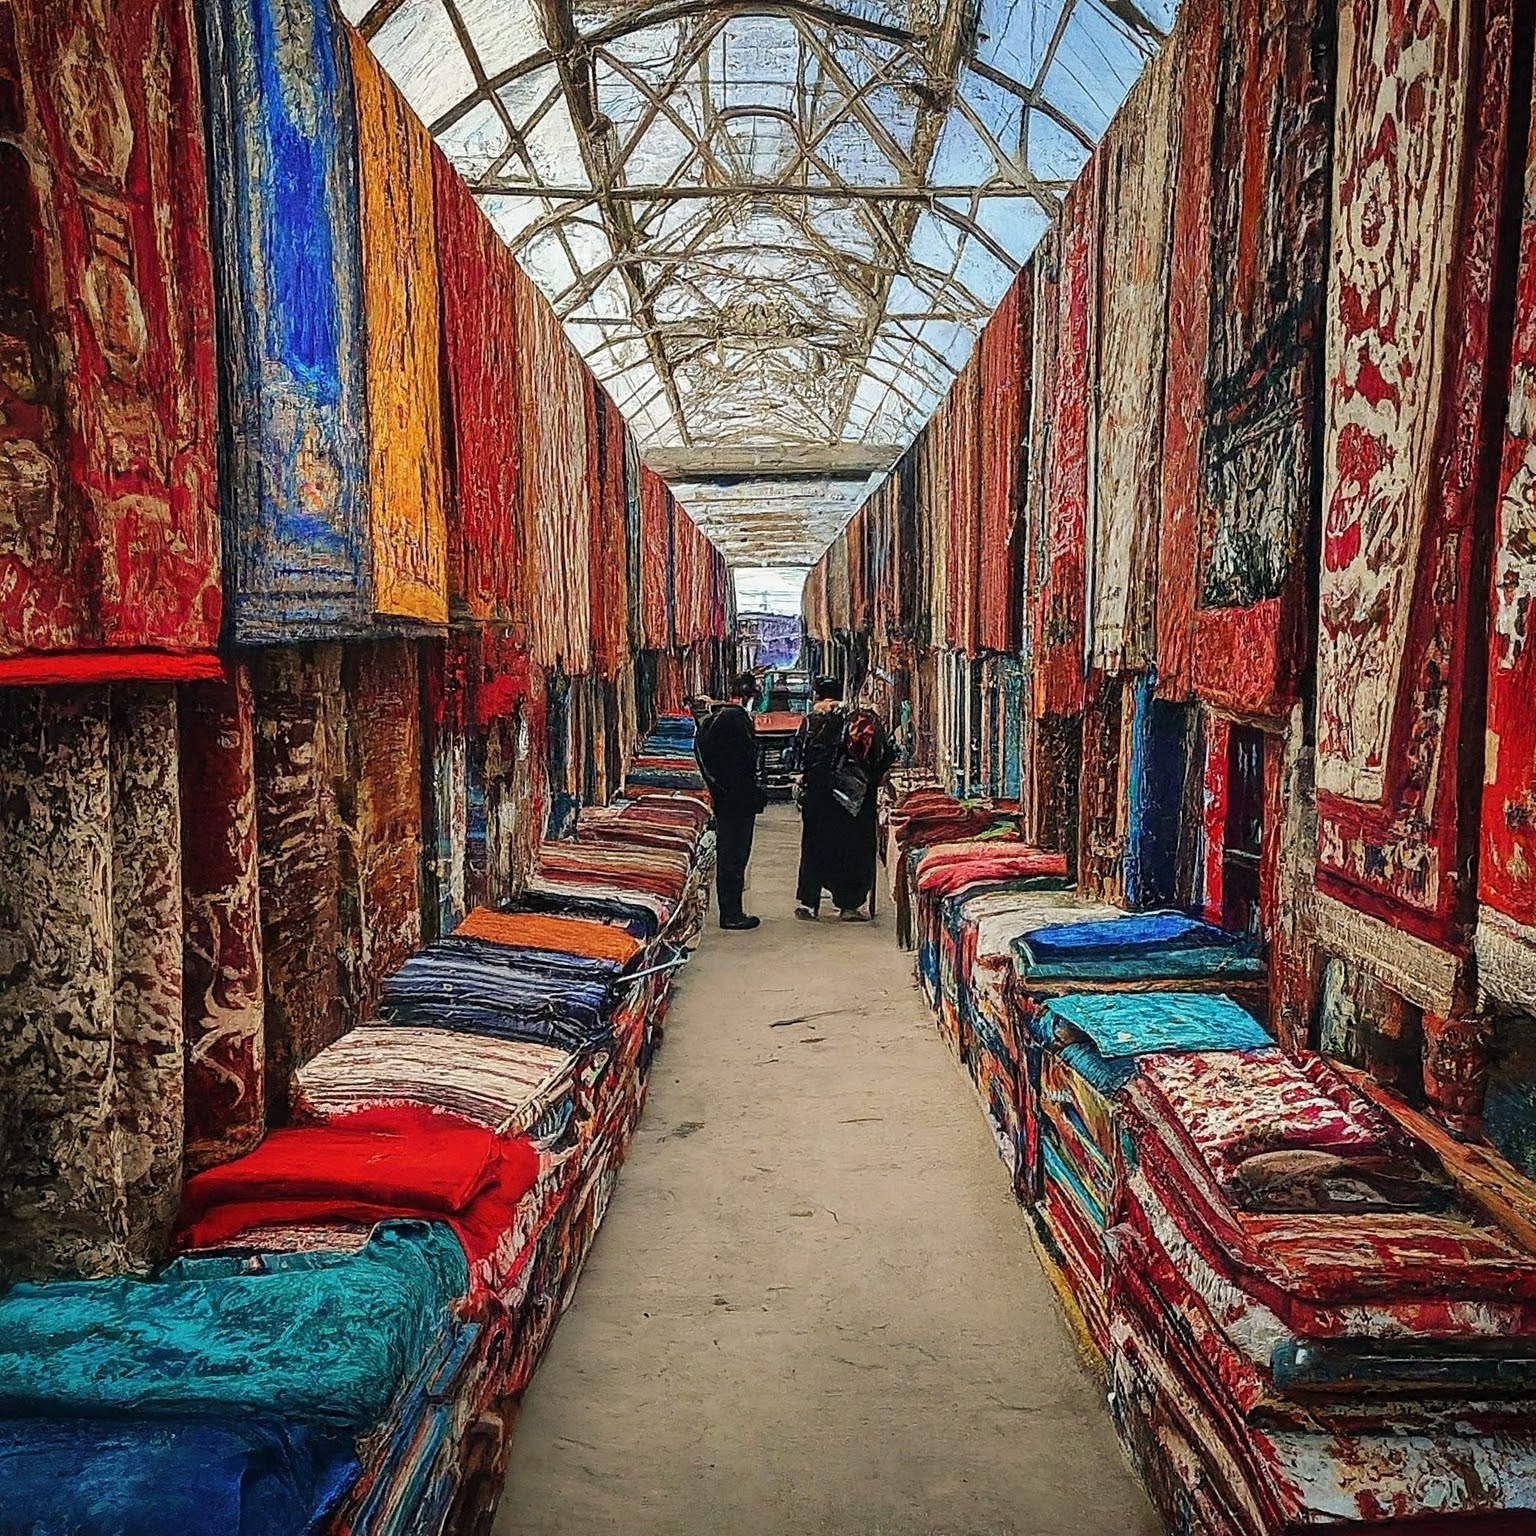 Shoppers browsing a section of Osh Bazaar, Kyrgyzstan, with fabrics, clothing, and carpets.